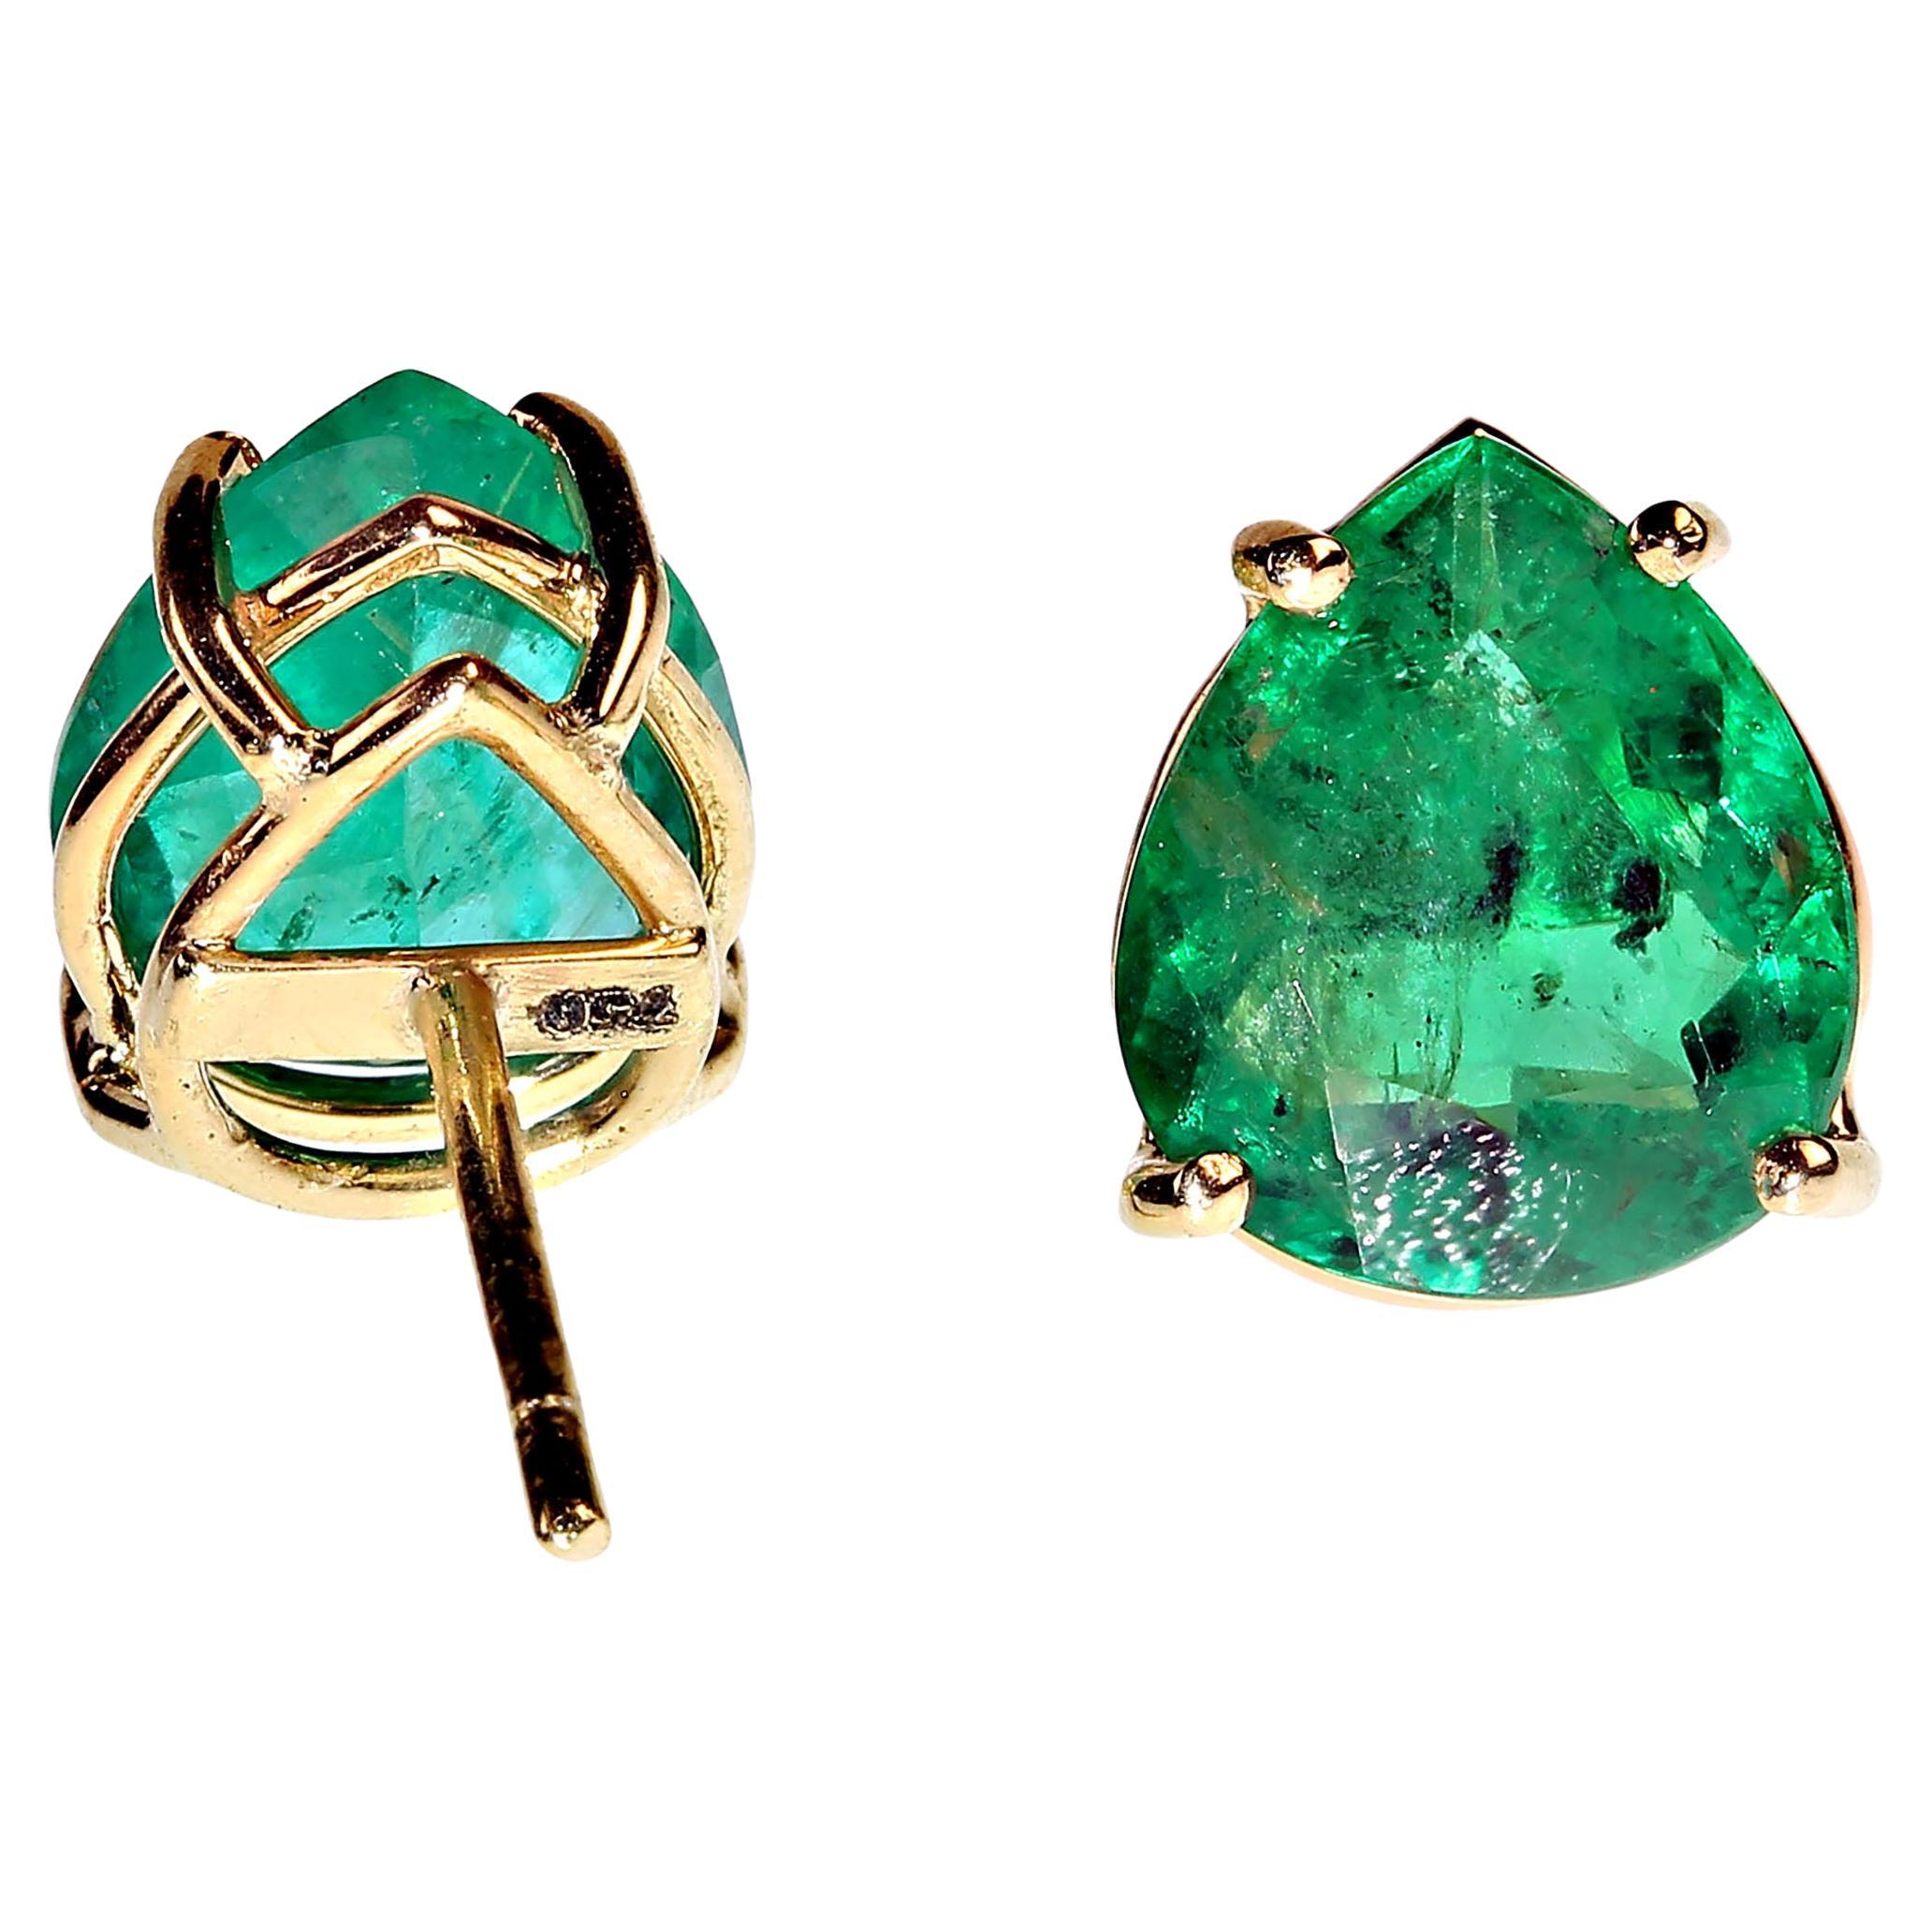 AJD Awesomely Elegant Emerald Earrings in 18K Yellow Gold For Sale